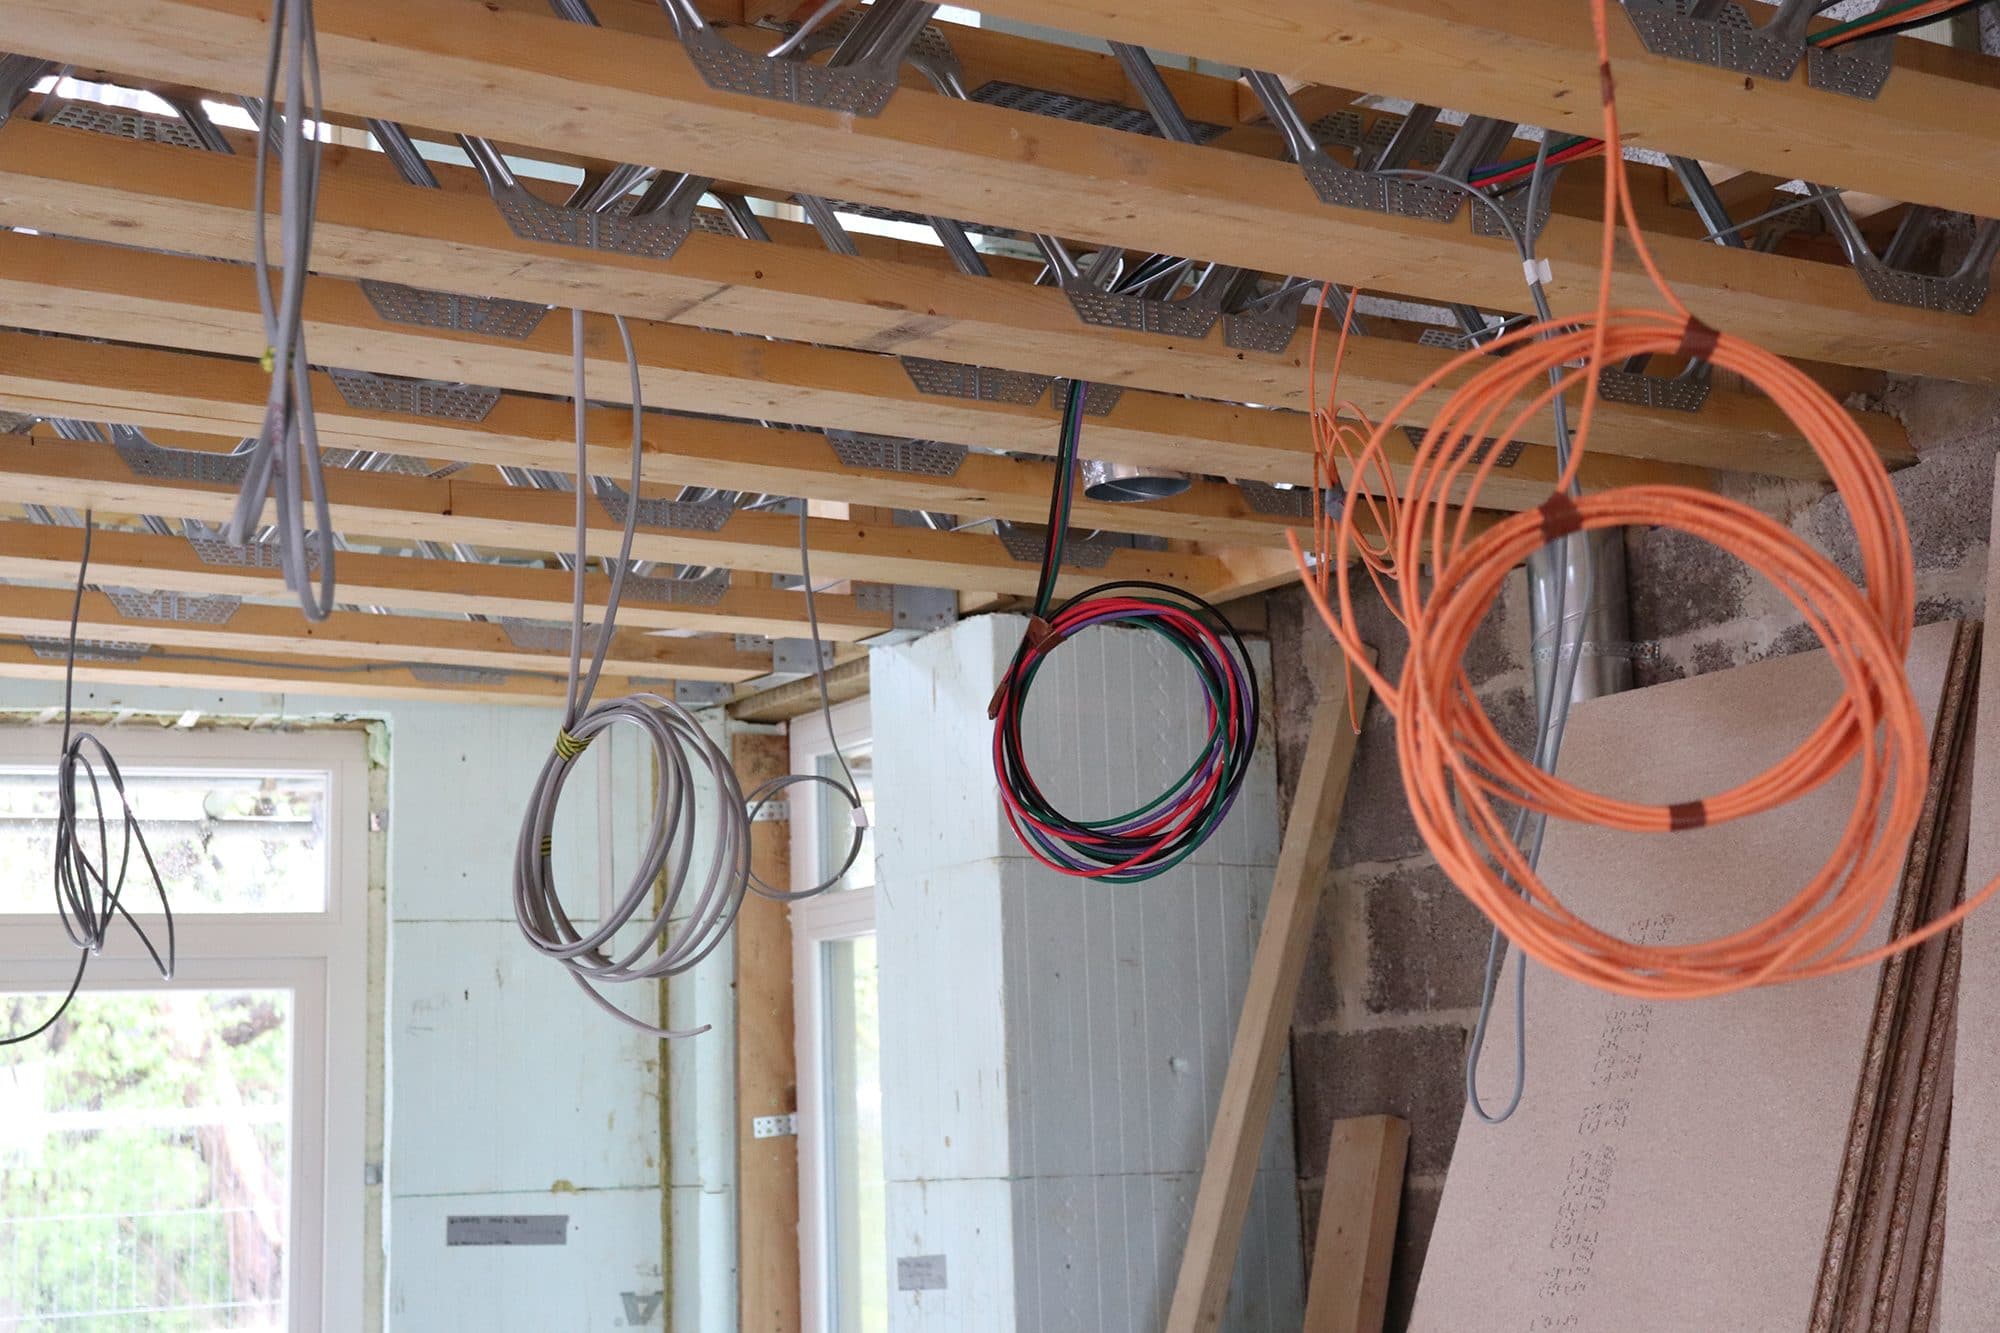 Smart Home Electrics Wiring at the Build It House